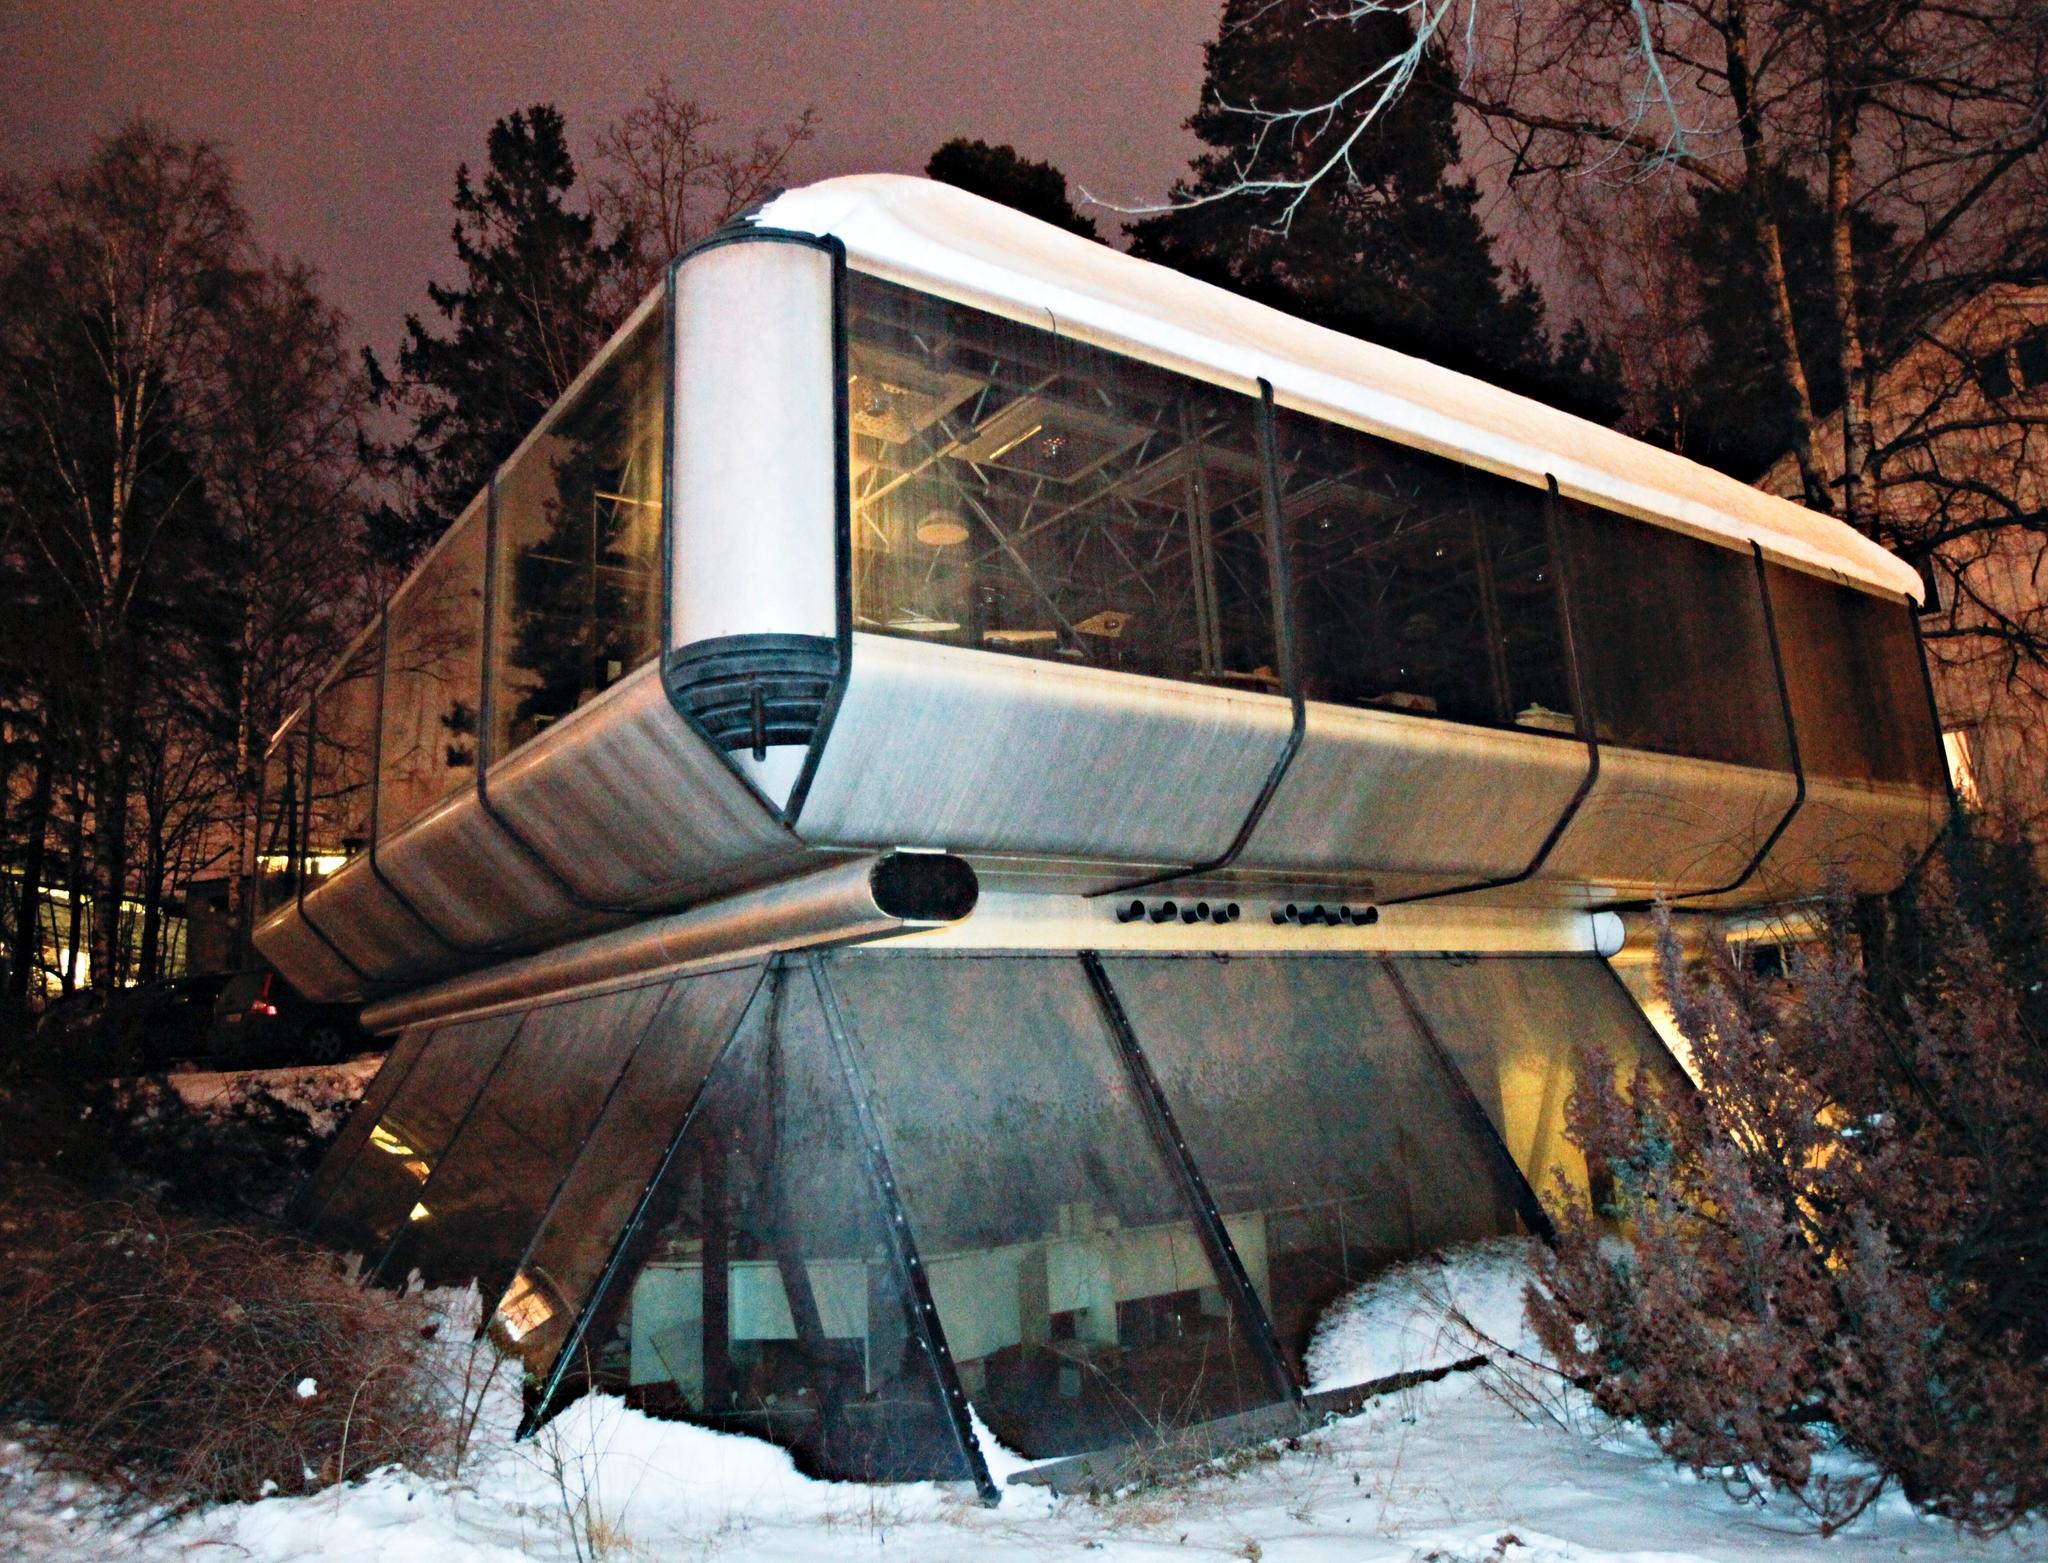 The “UFO building” in Lysaker is given in Finnish